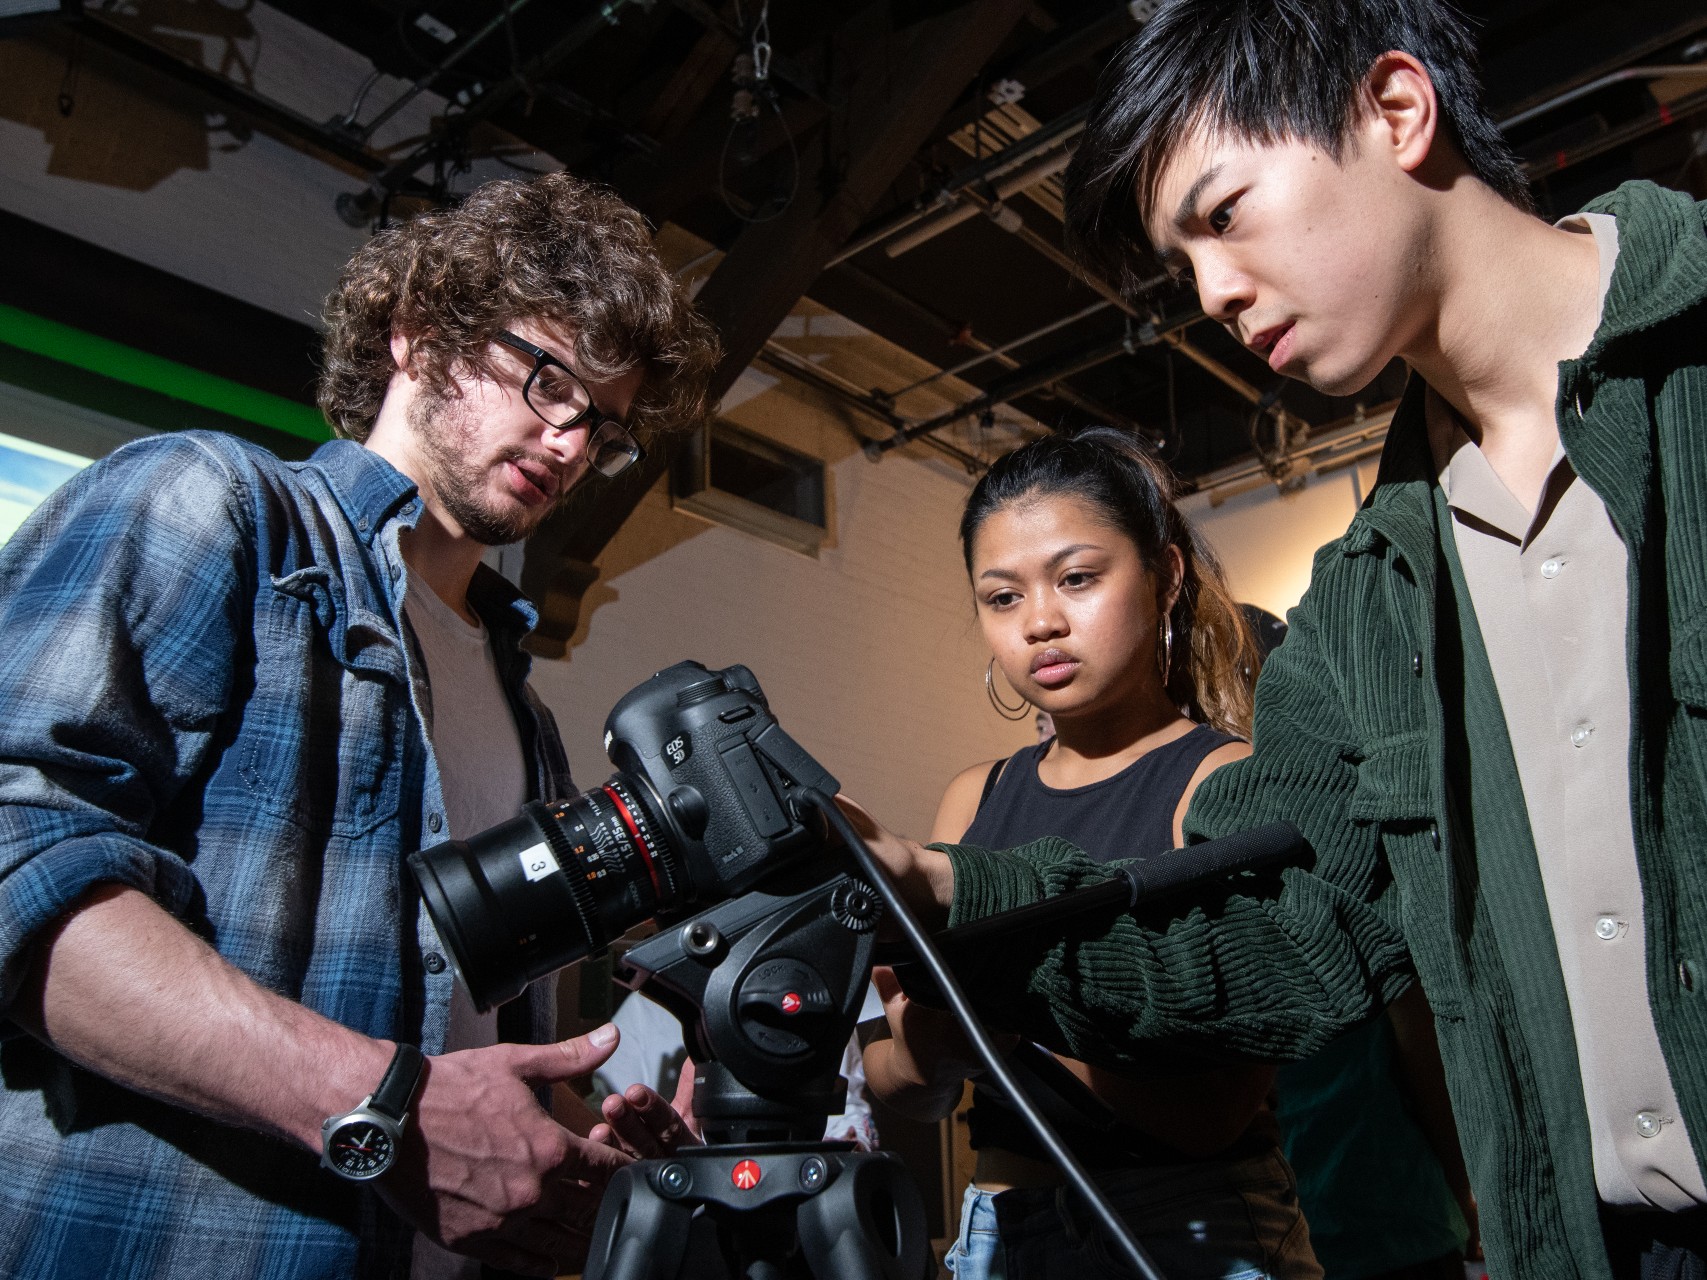 Students examine camera equipment as part of their classroom learning experience.